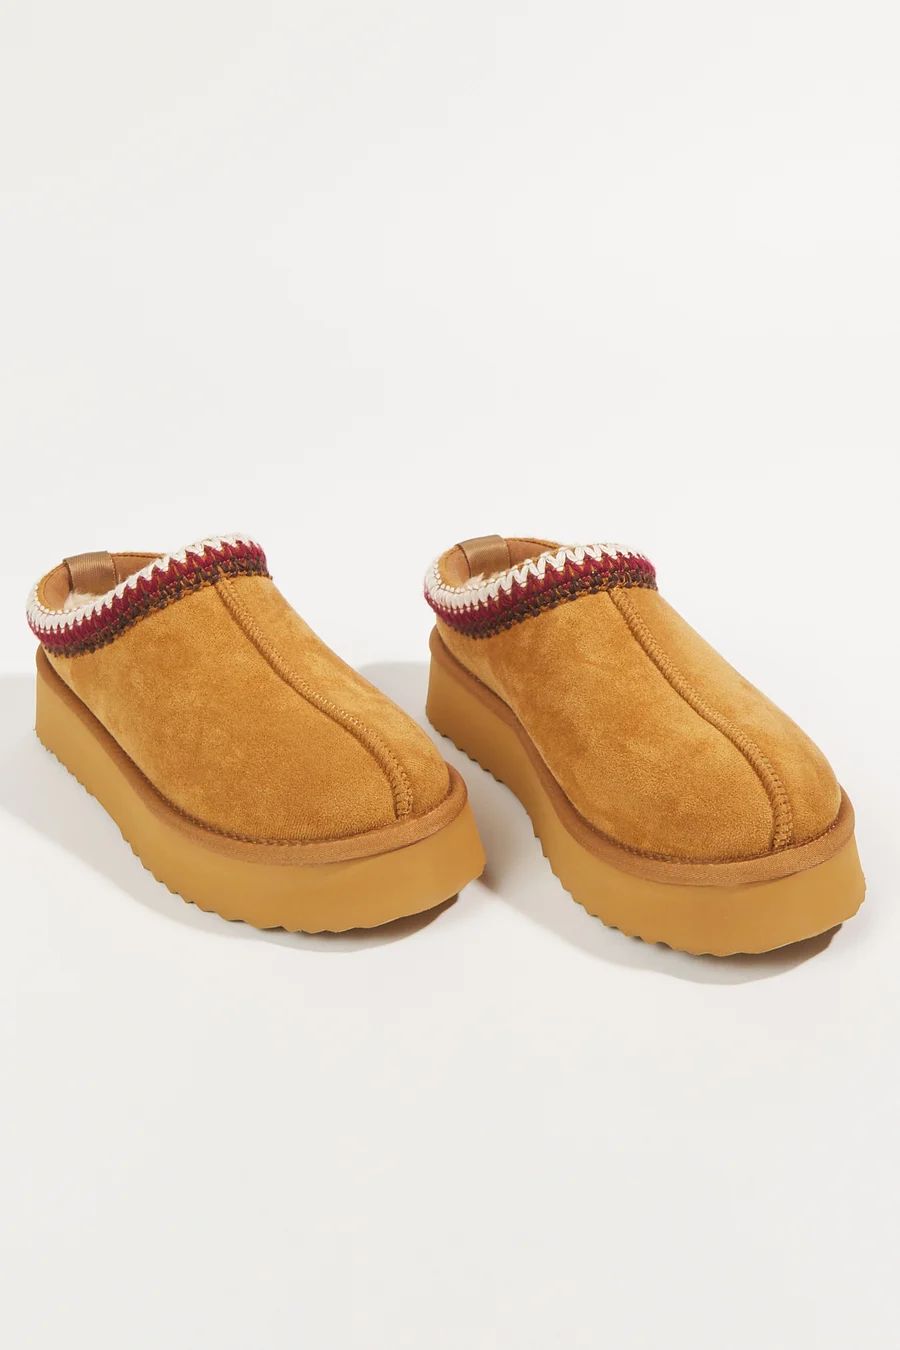 Glide Cream Slippers | AS Revival | Altar'd State